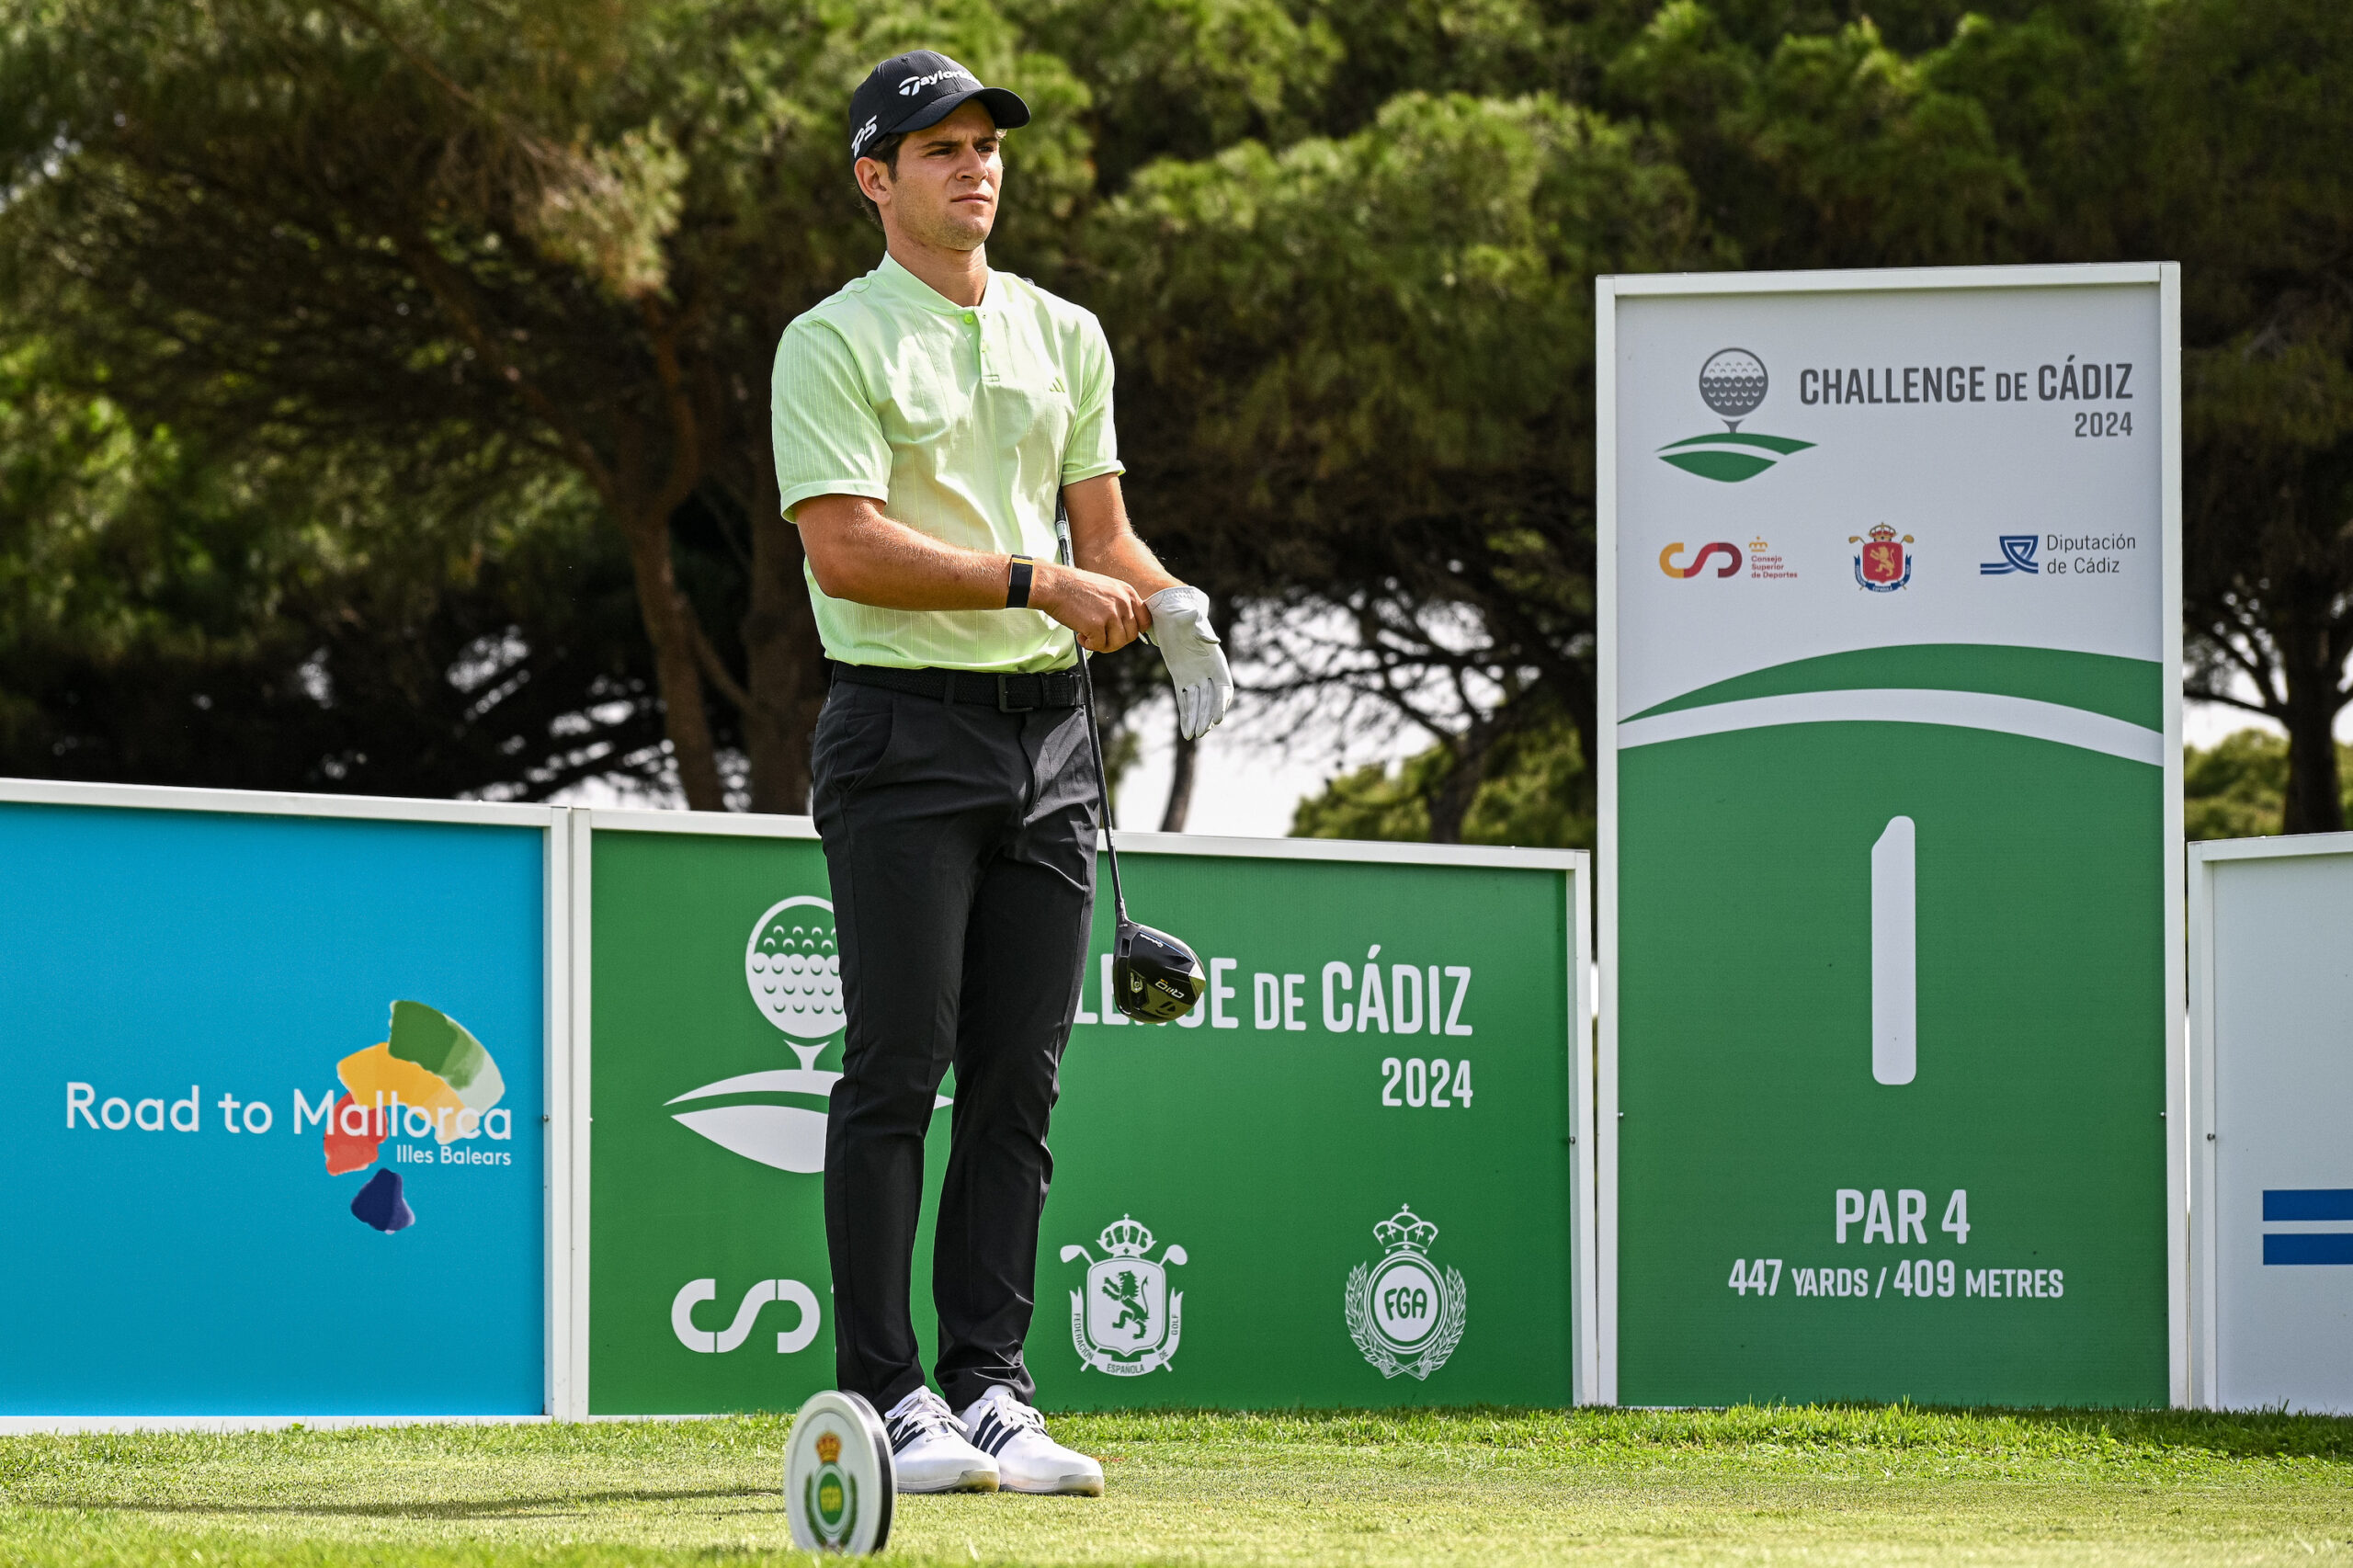 CADIZ, SPAIN - JUNE 6: Angel Ayora of Spain prepares to plays his tee shot on the 1st hole during day one of the Challenge de Cadiz at Iberostar Real Golf Novo Sancti Petri on June 6, 2024 in Cadiz, Spain. (Photo by Octavio Passos/Getty Images)